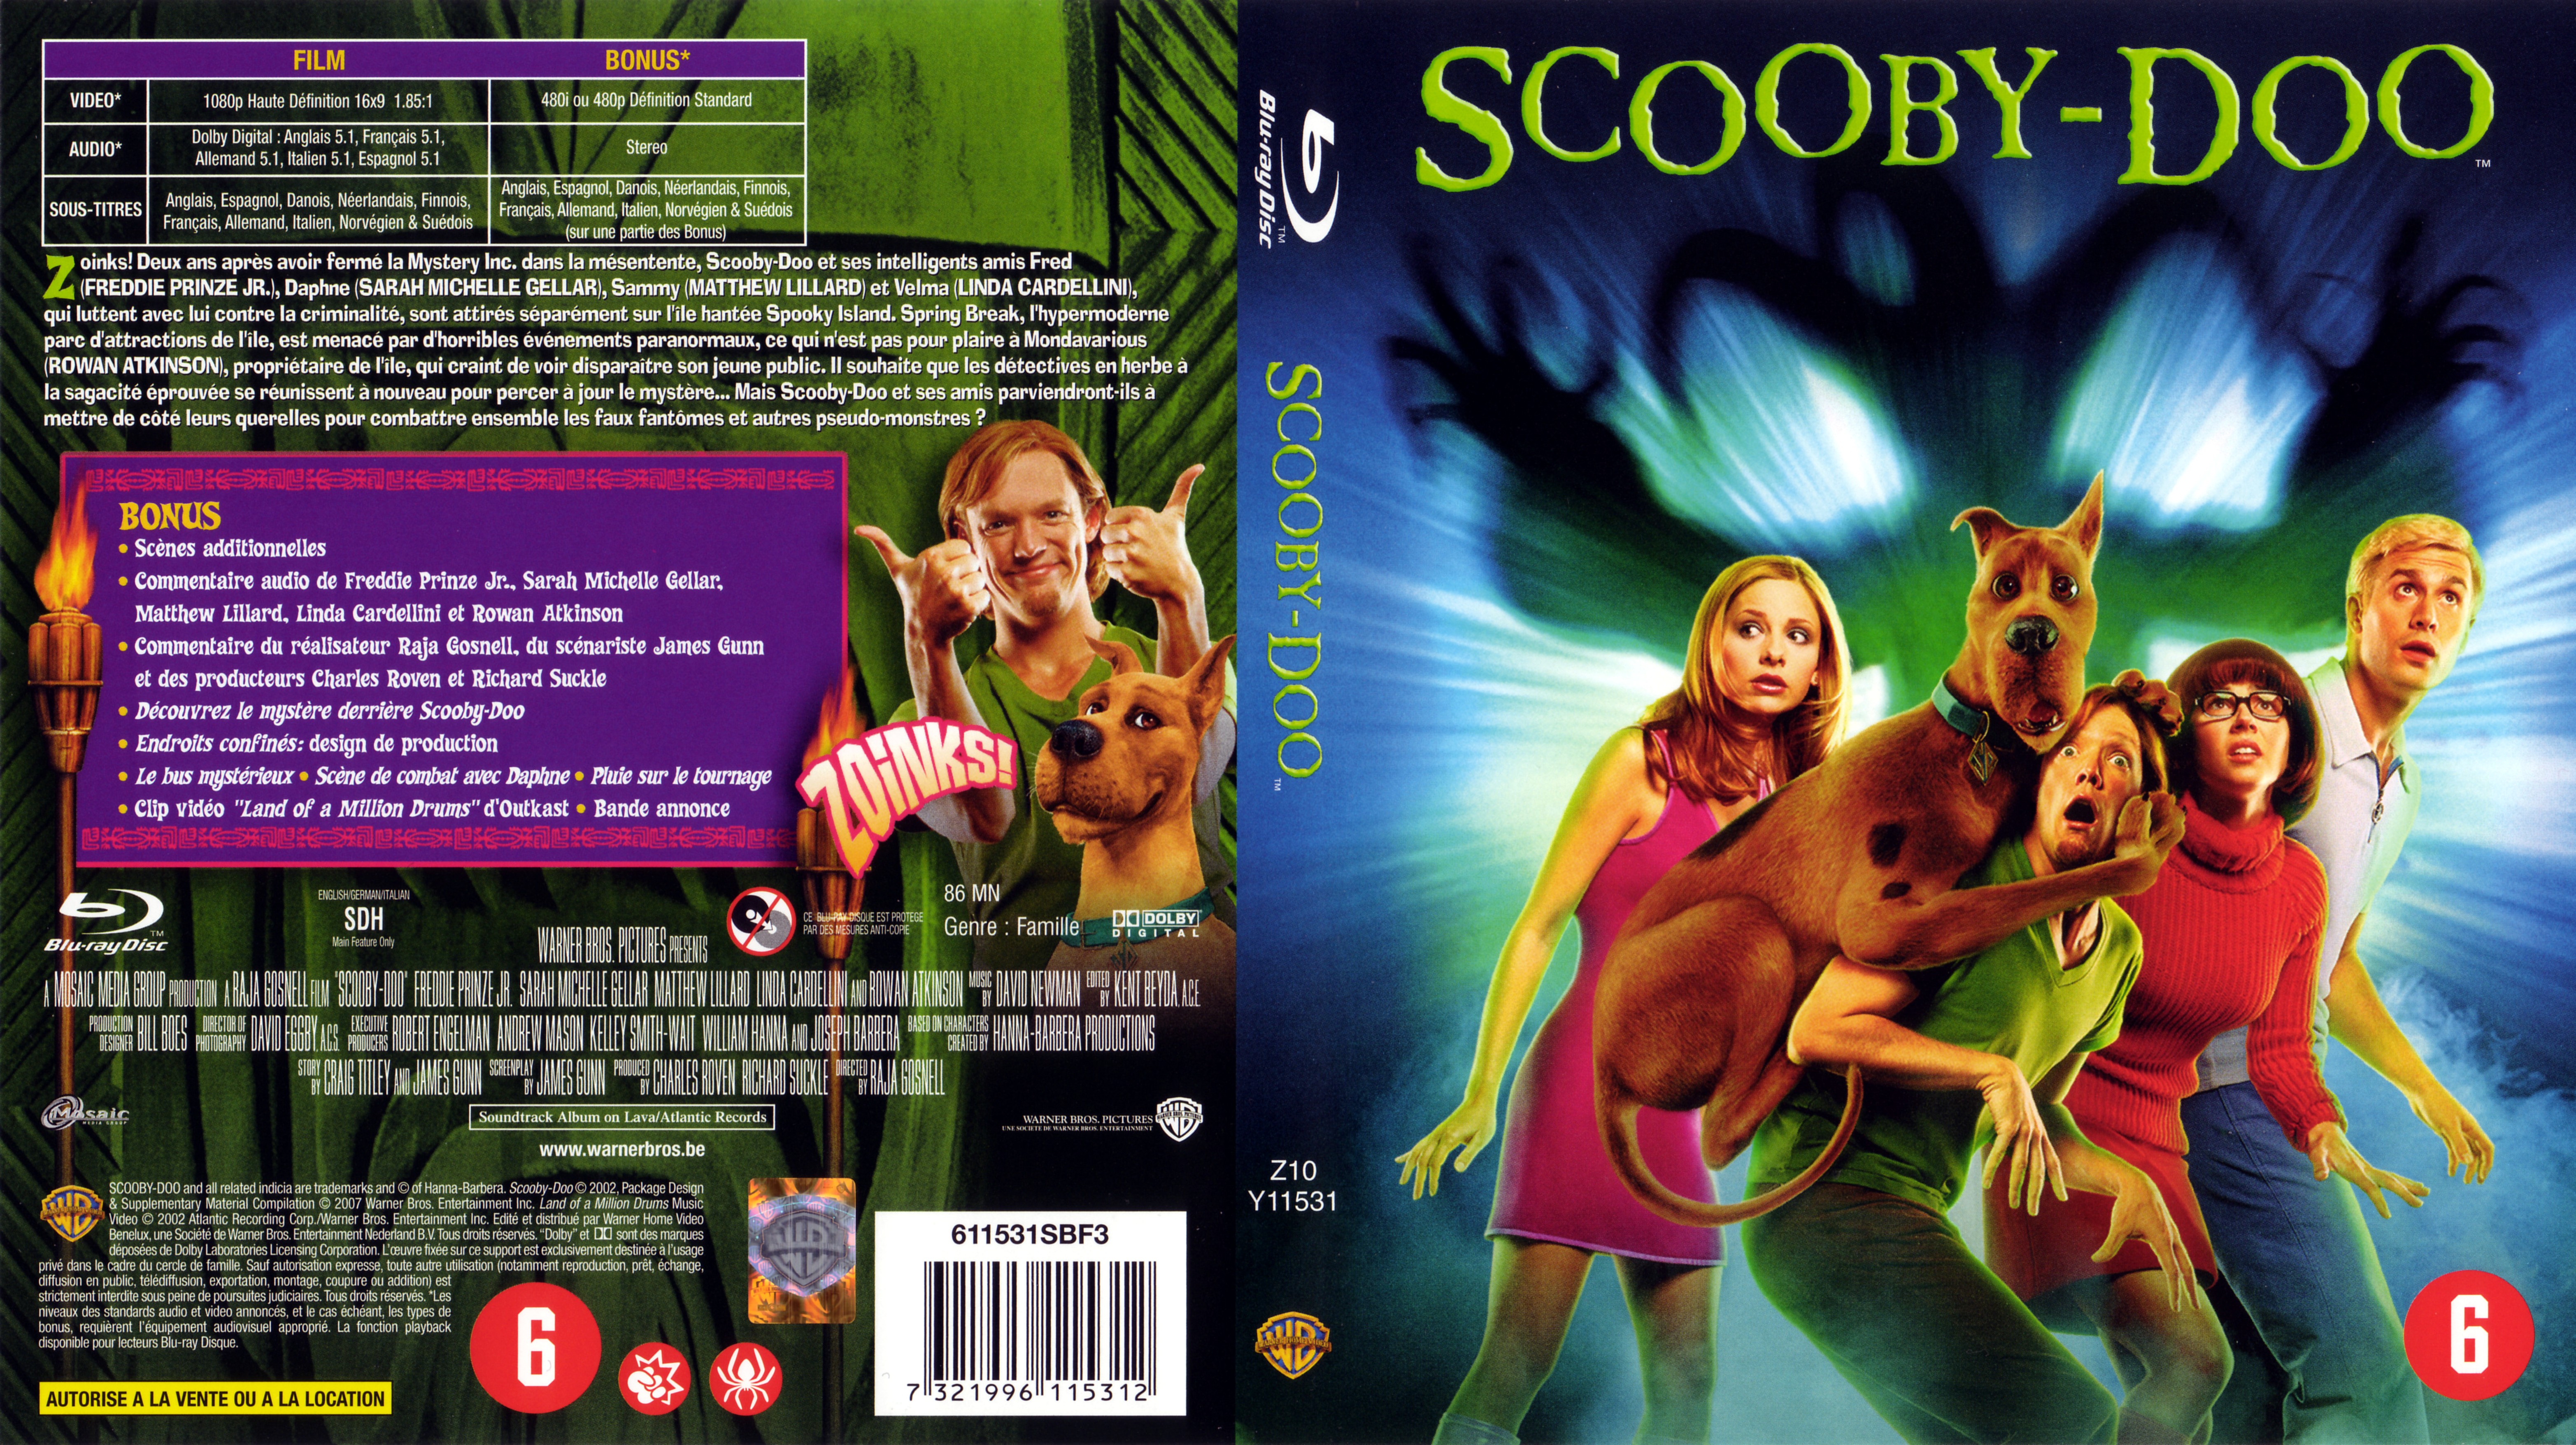 Jaquette DVD Scooby-doo (BLU-RAY)